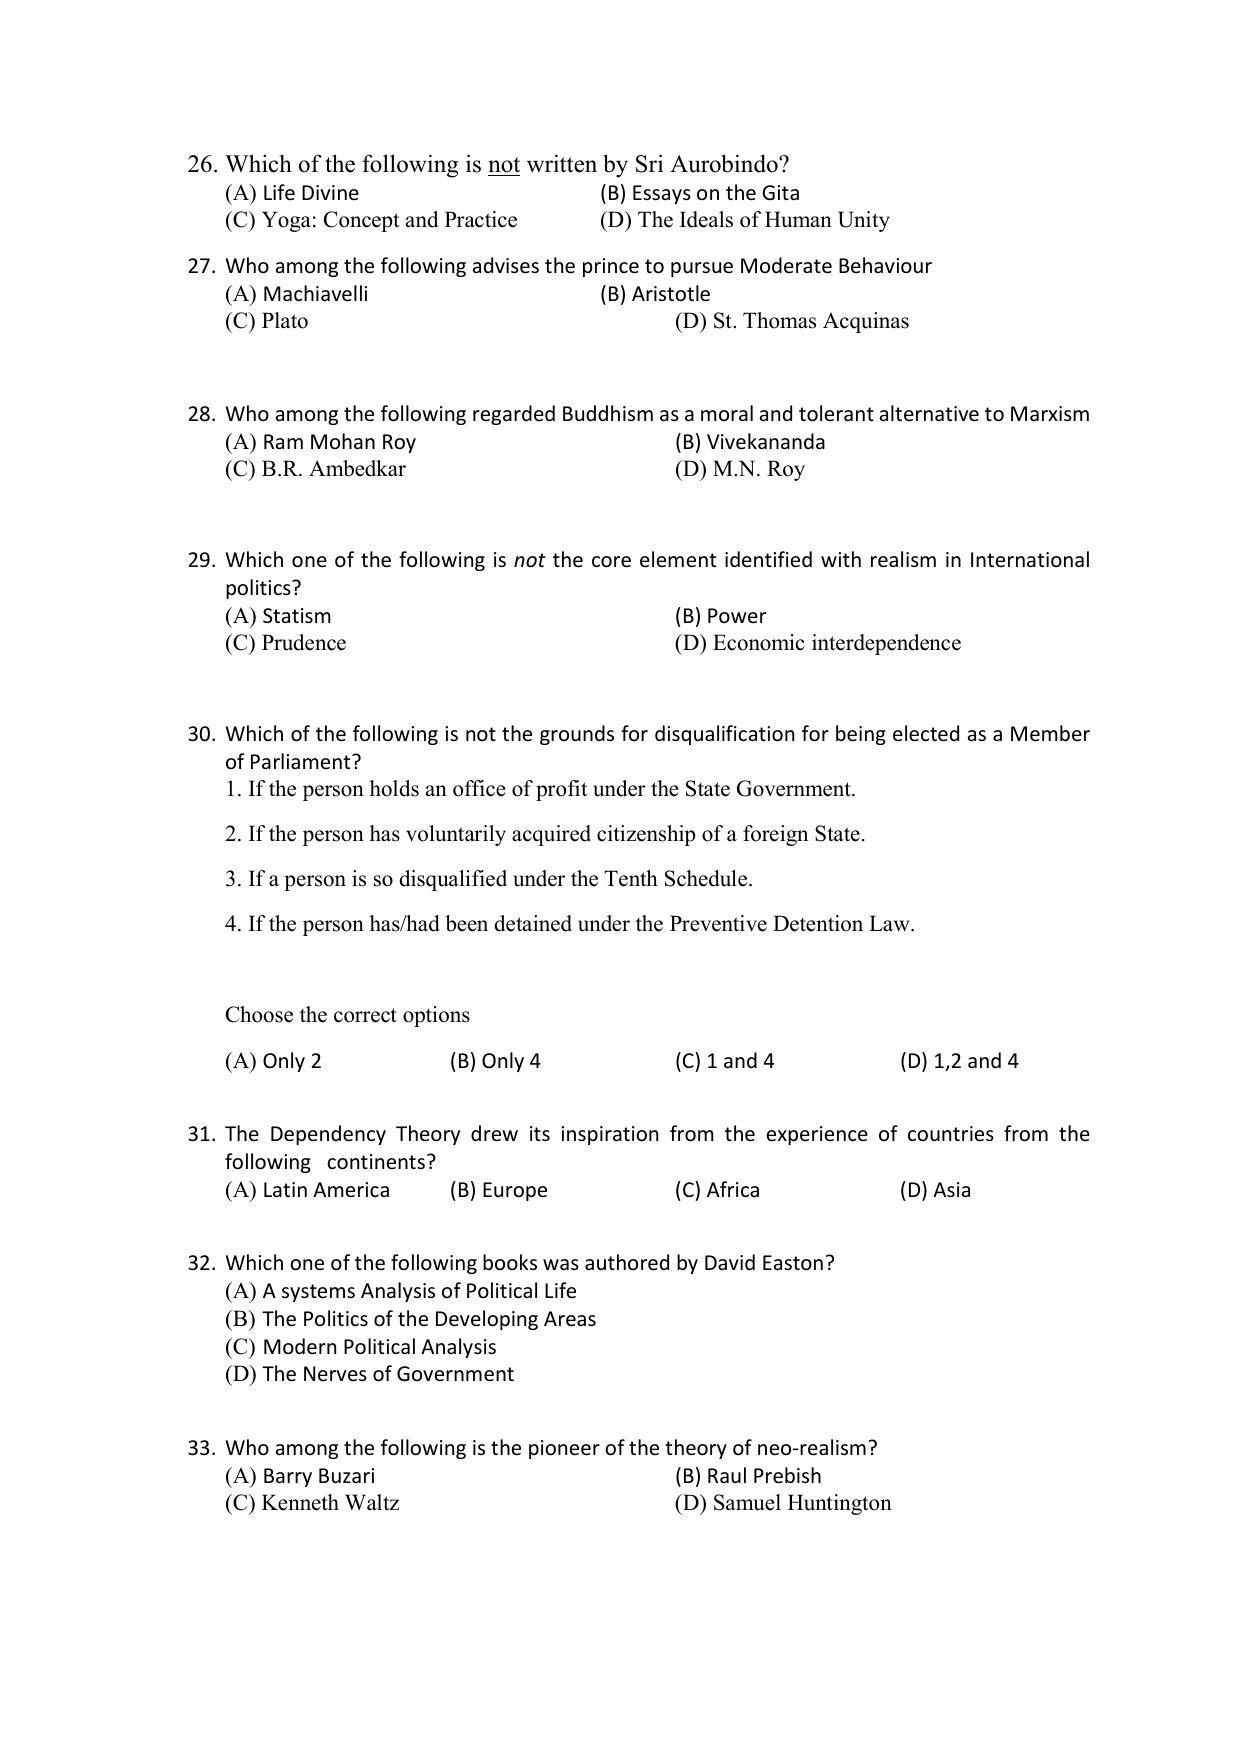 PU MPET Ancient Indian History & Archeology 2022 Question Papers - Page 29